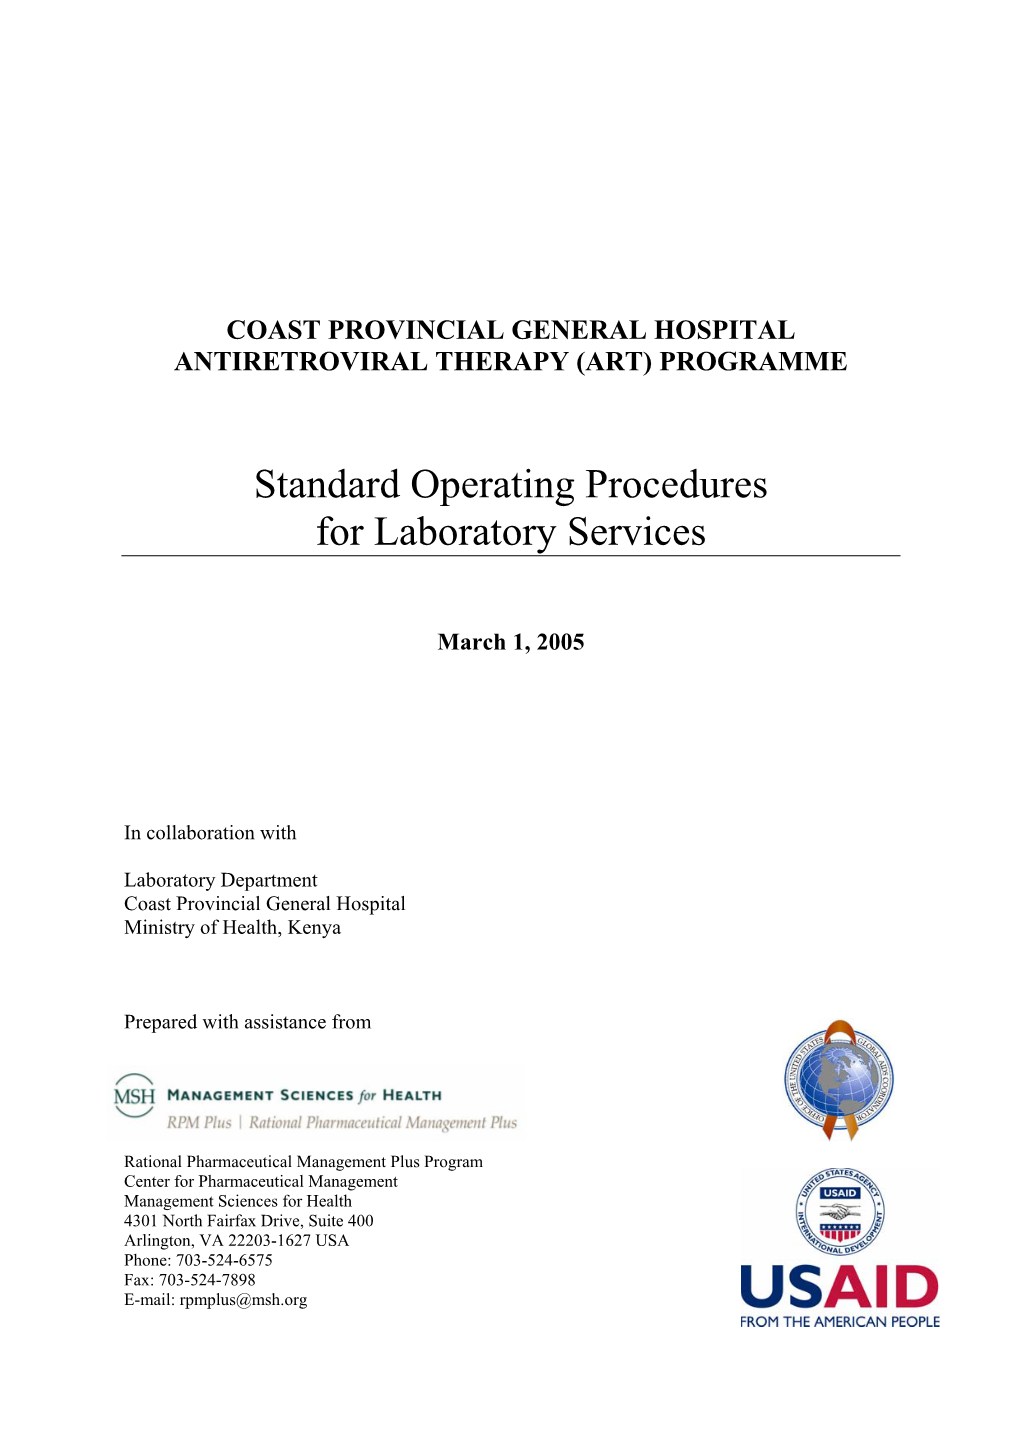 Standard Operating Procedures for Laboratory Services